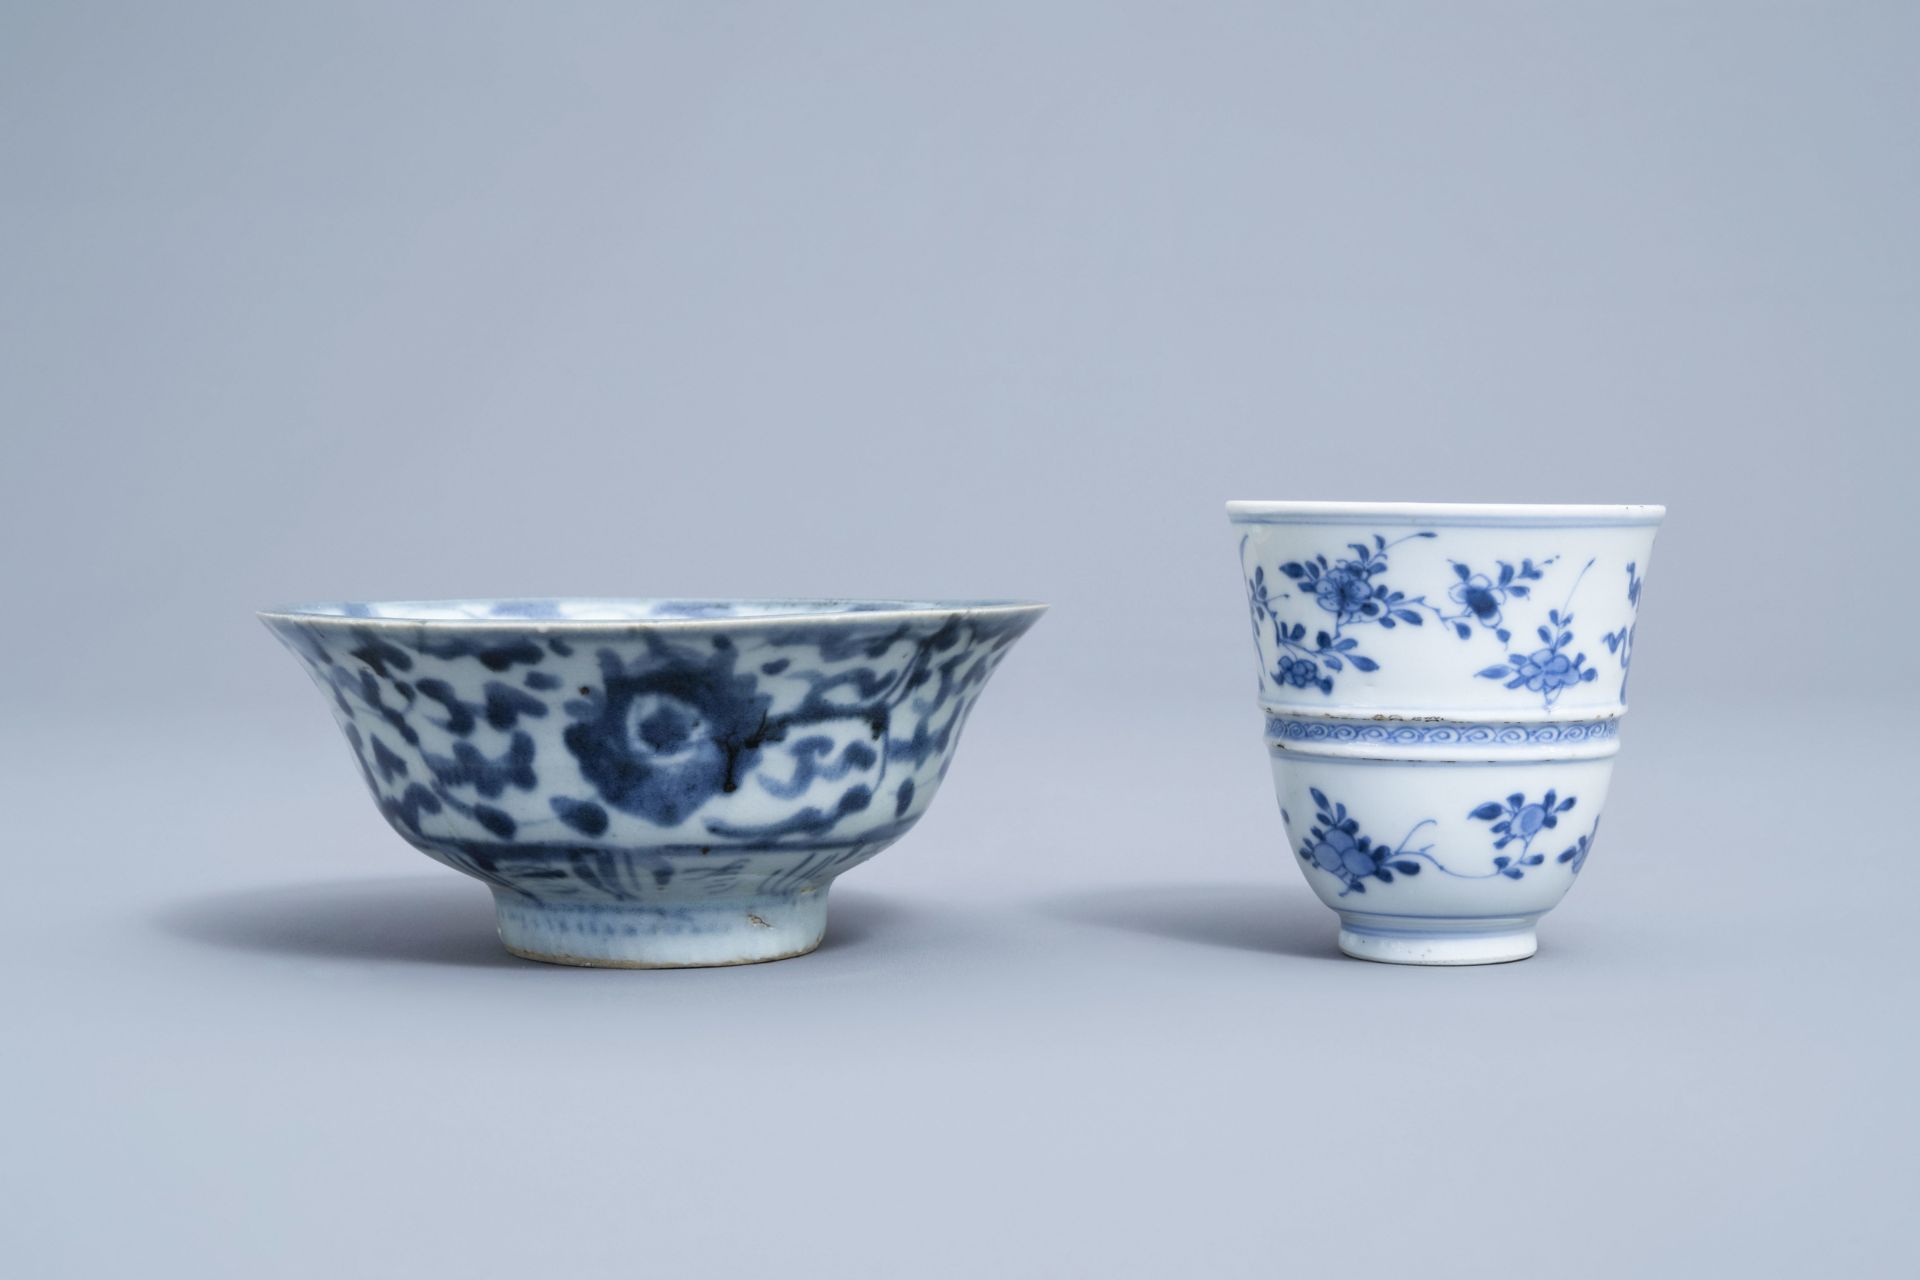 A varied collection of Chinese blue and white porcelain, 18th C. and later - Image 21 of 54